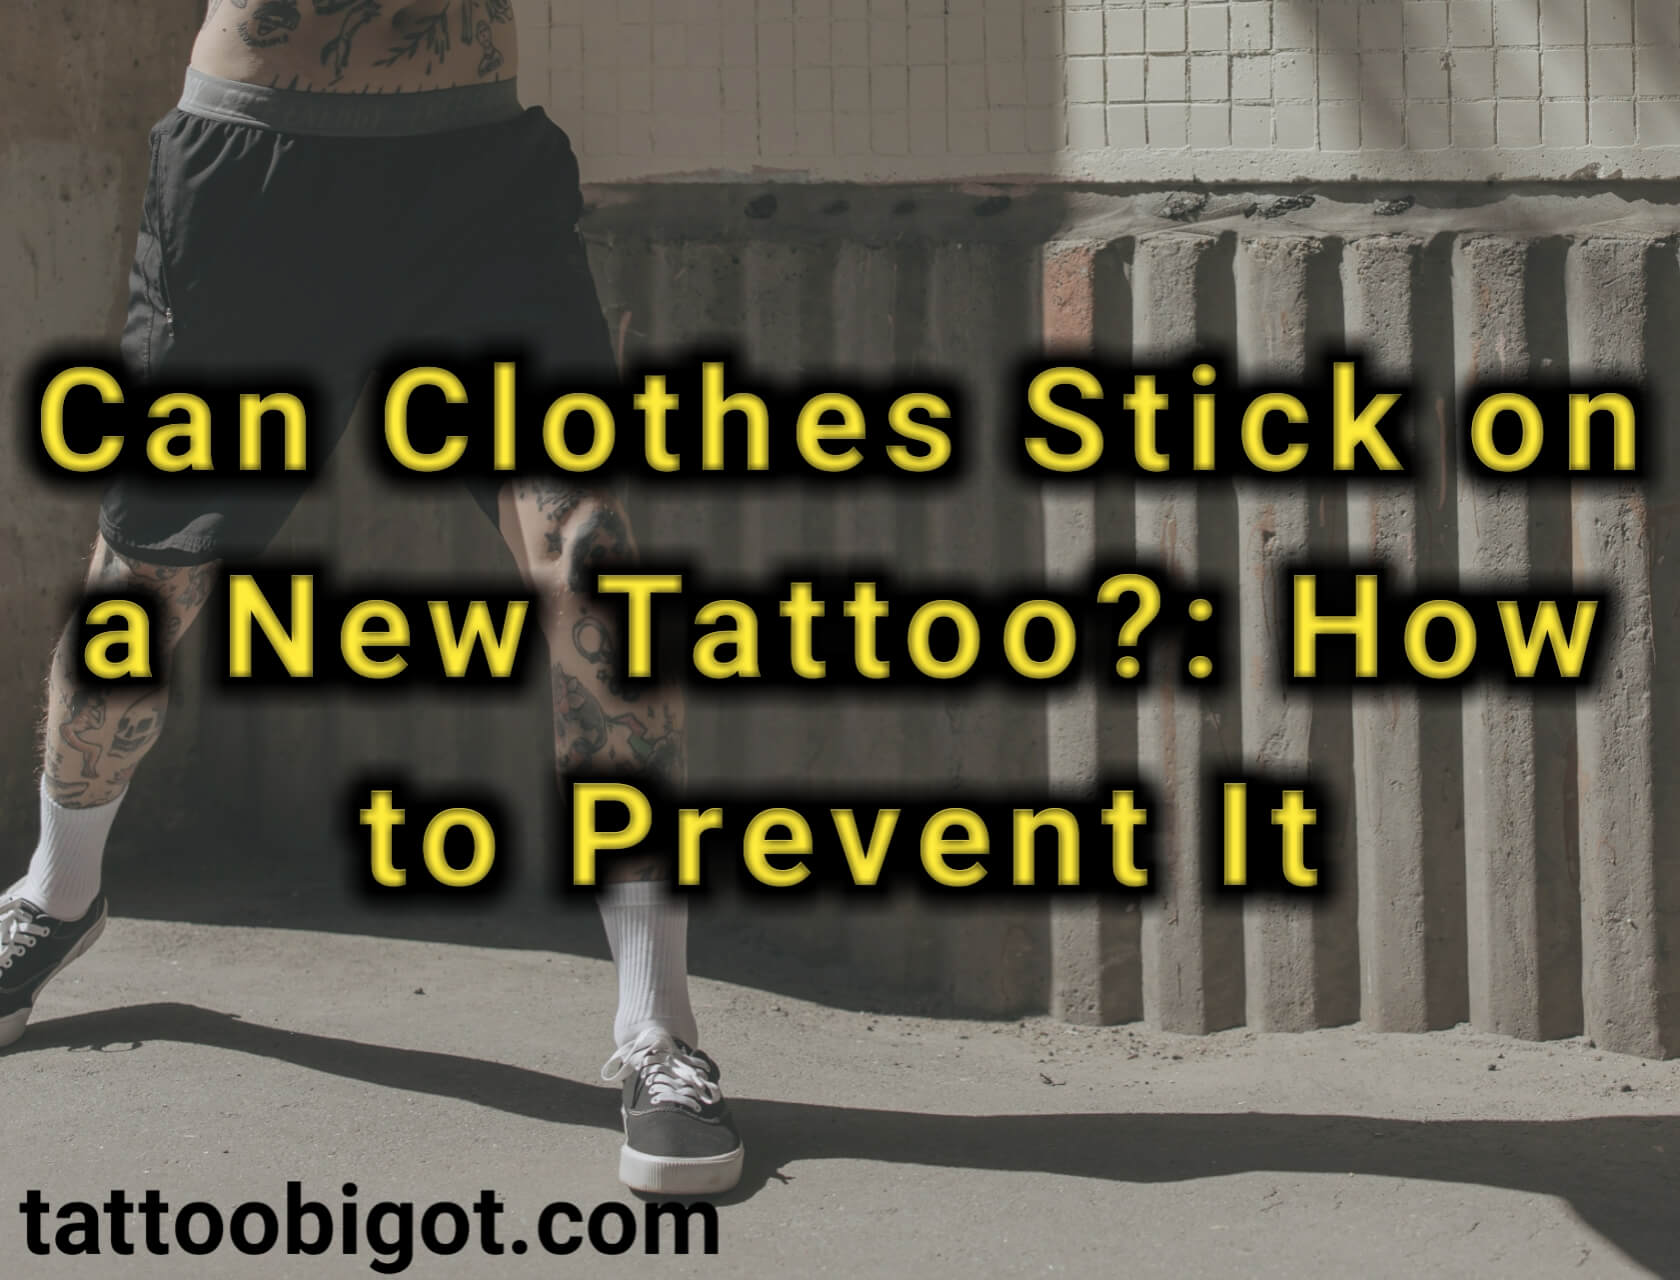 Can Clothes Stick on a New Tattoo